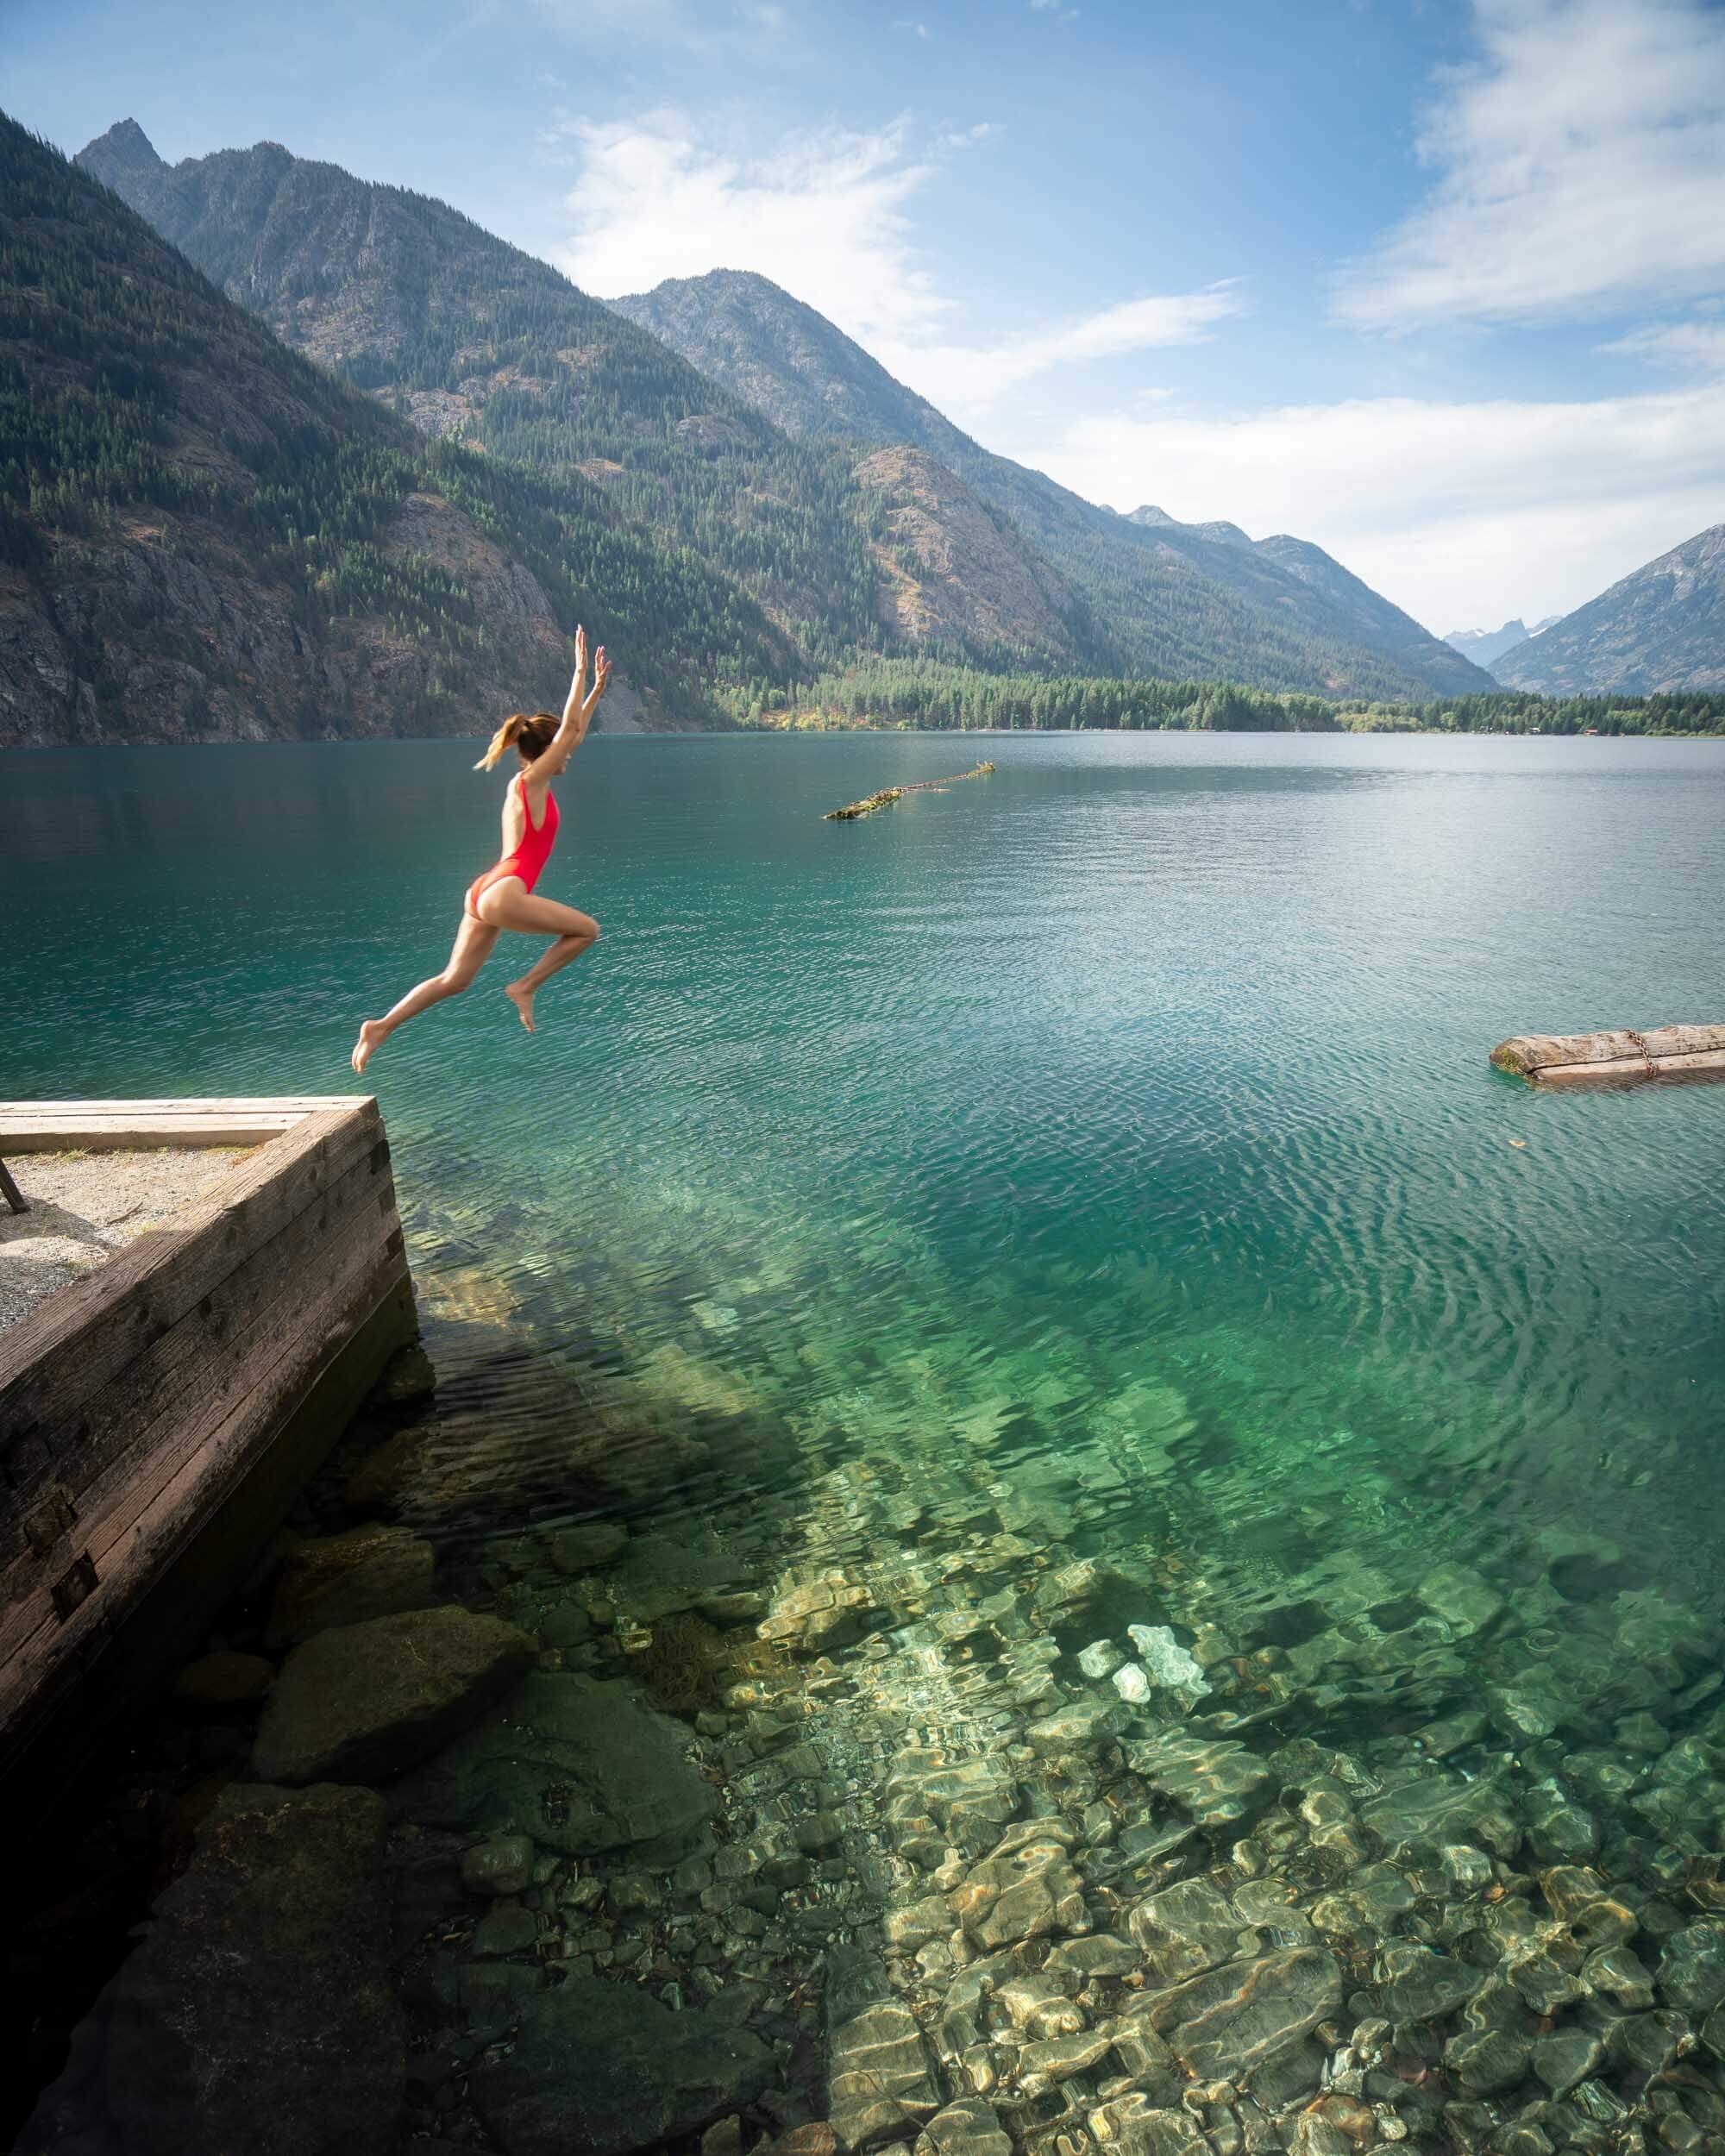 Jumping into Lake Chelan off one of the boat ramp at Stehekin.